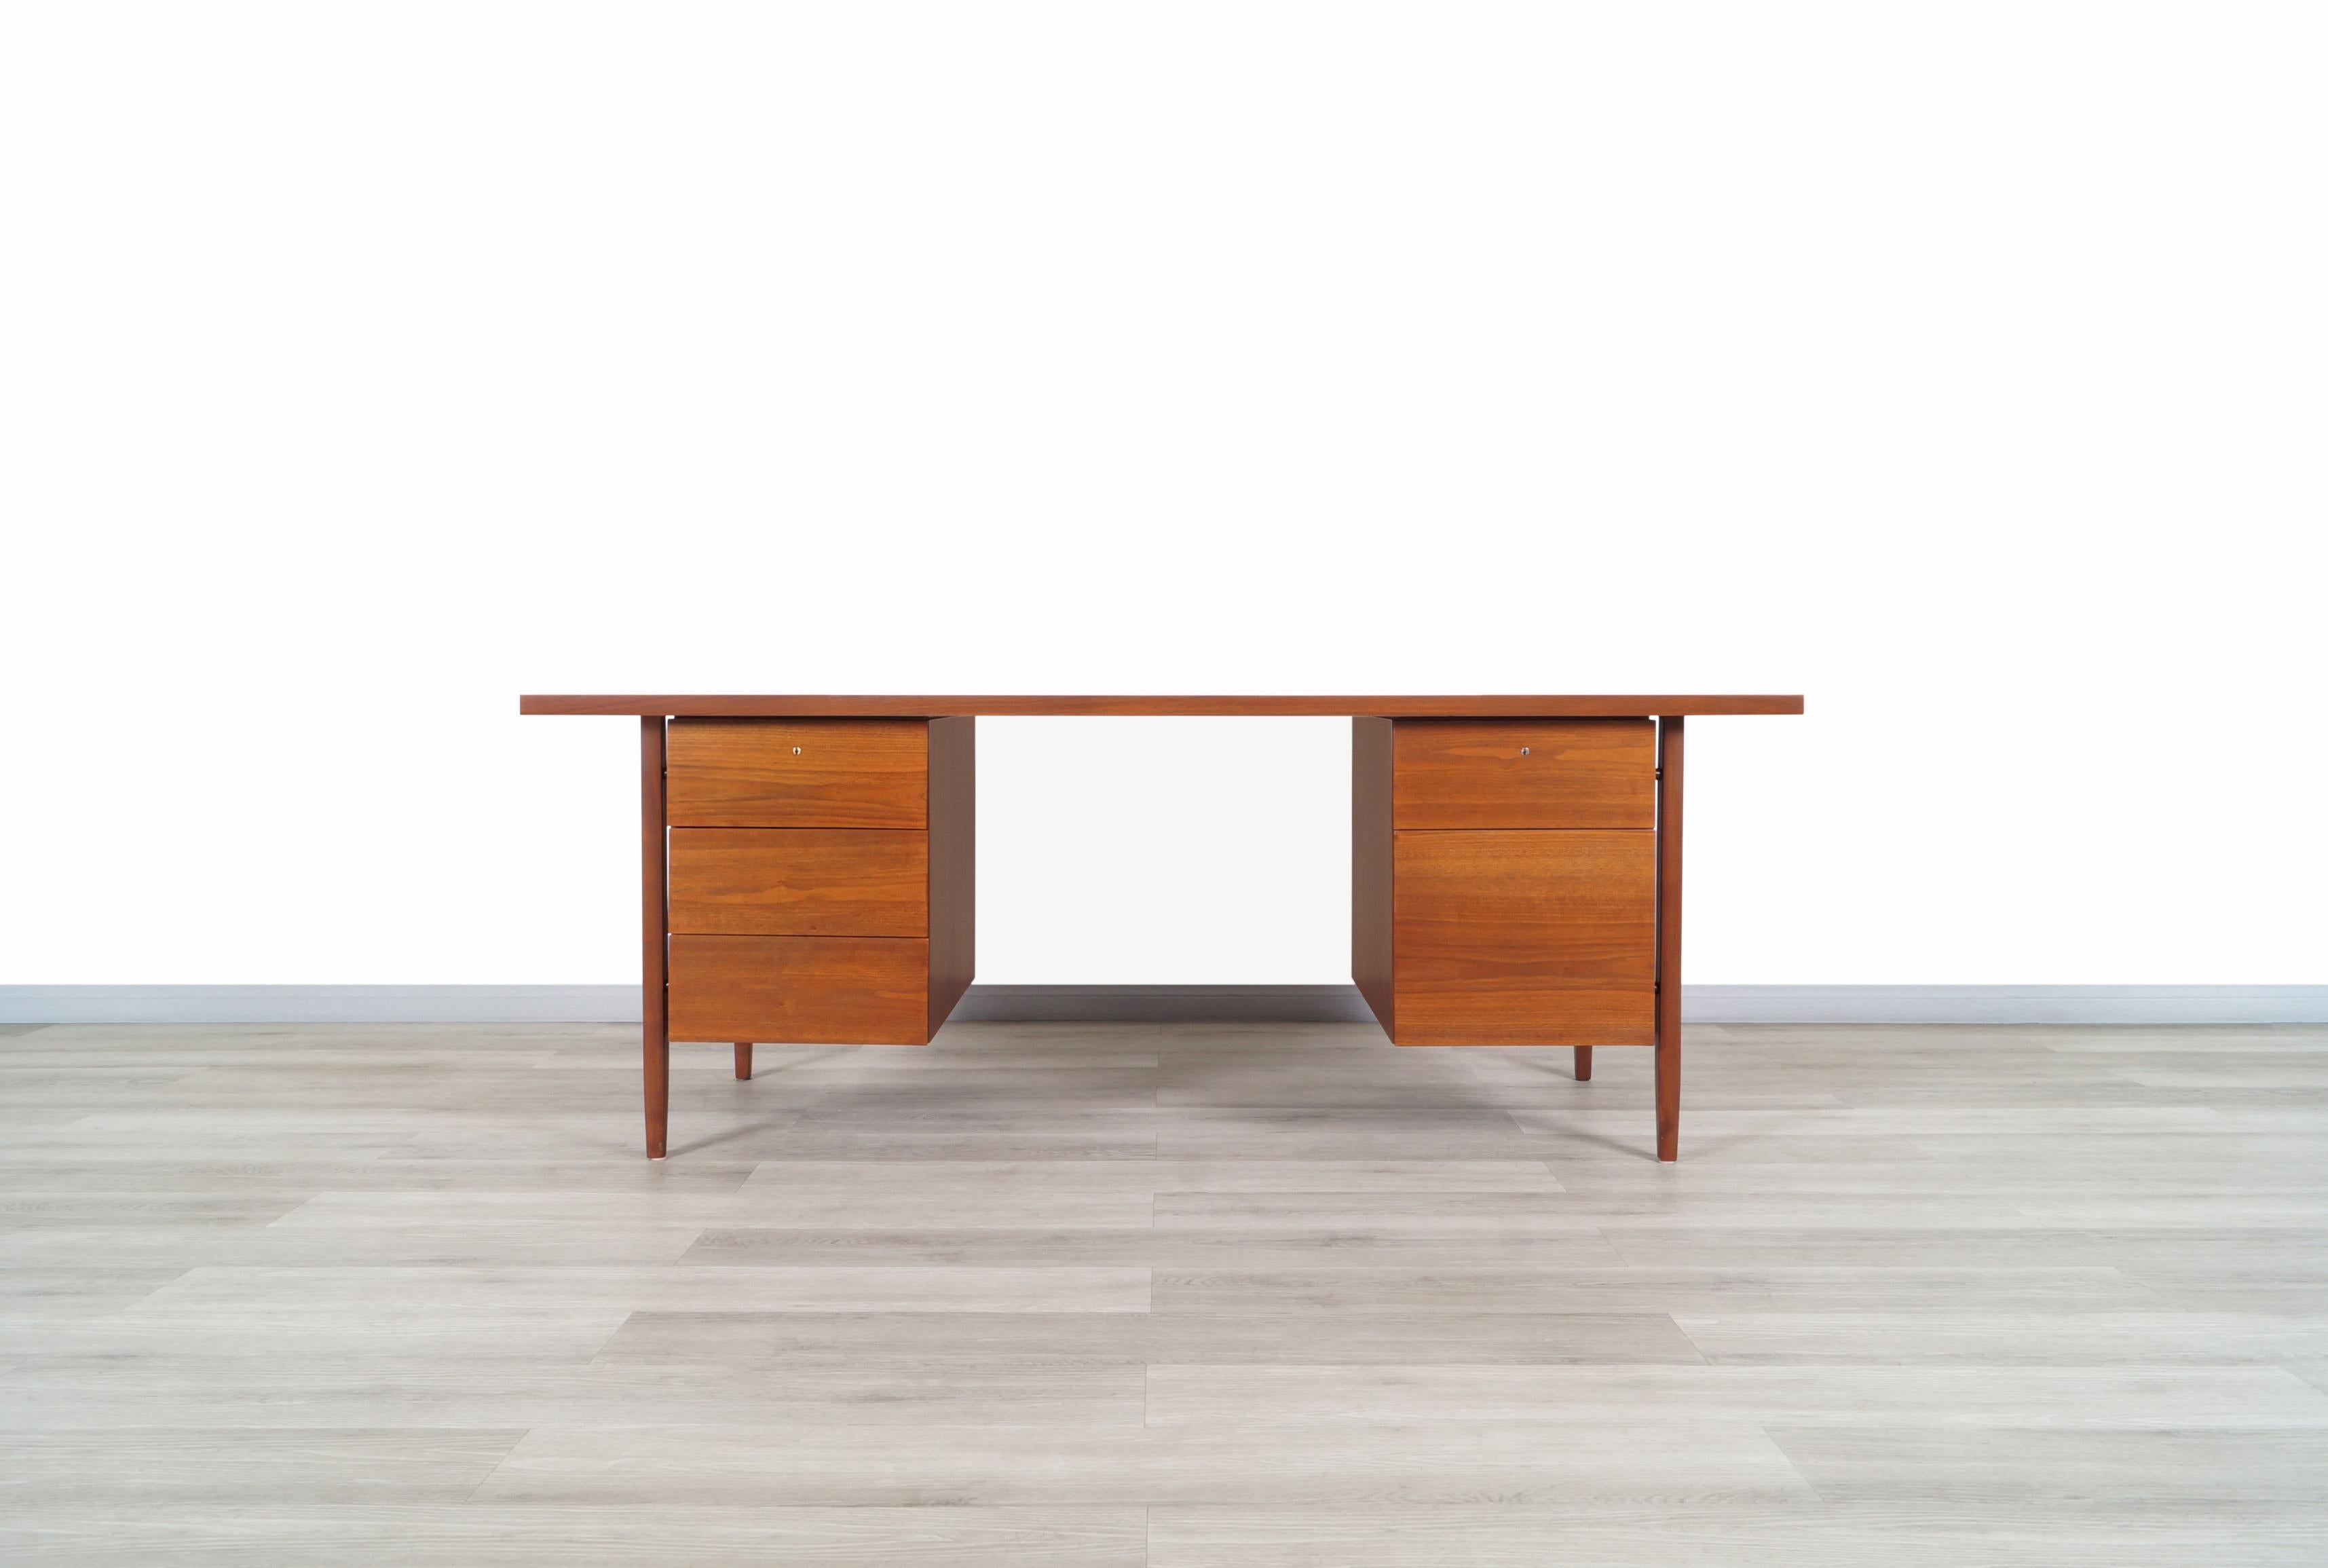 Exceptional vintage walnut executive desk designed by Florence Knoll for Knoll Associates Inc. in the United States, circa 1950s. This stunning desk, also known as model-1503, is made of walnut and features two rectangular cases that look like